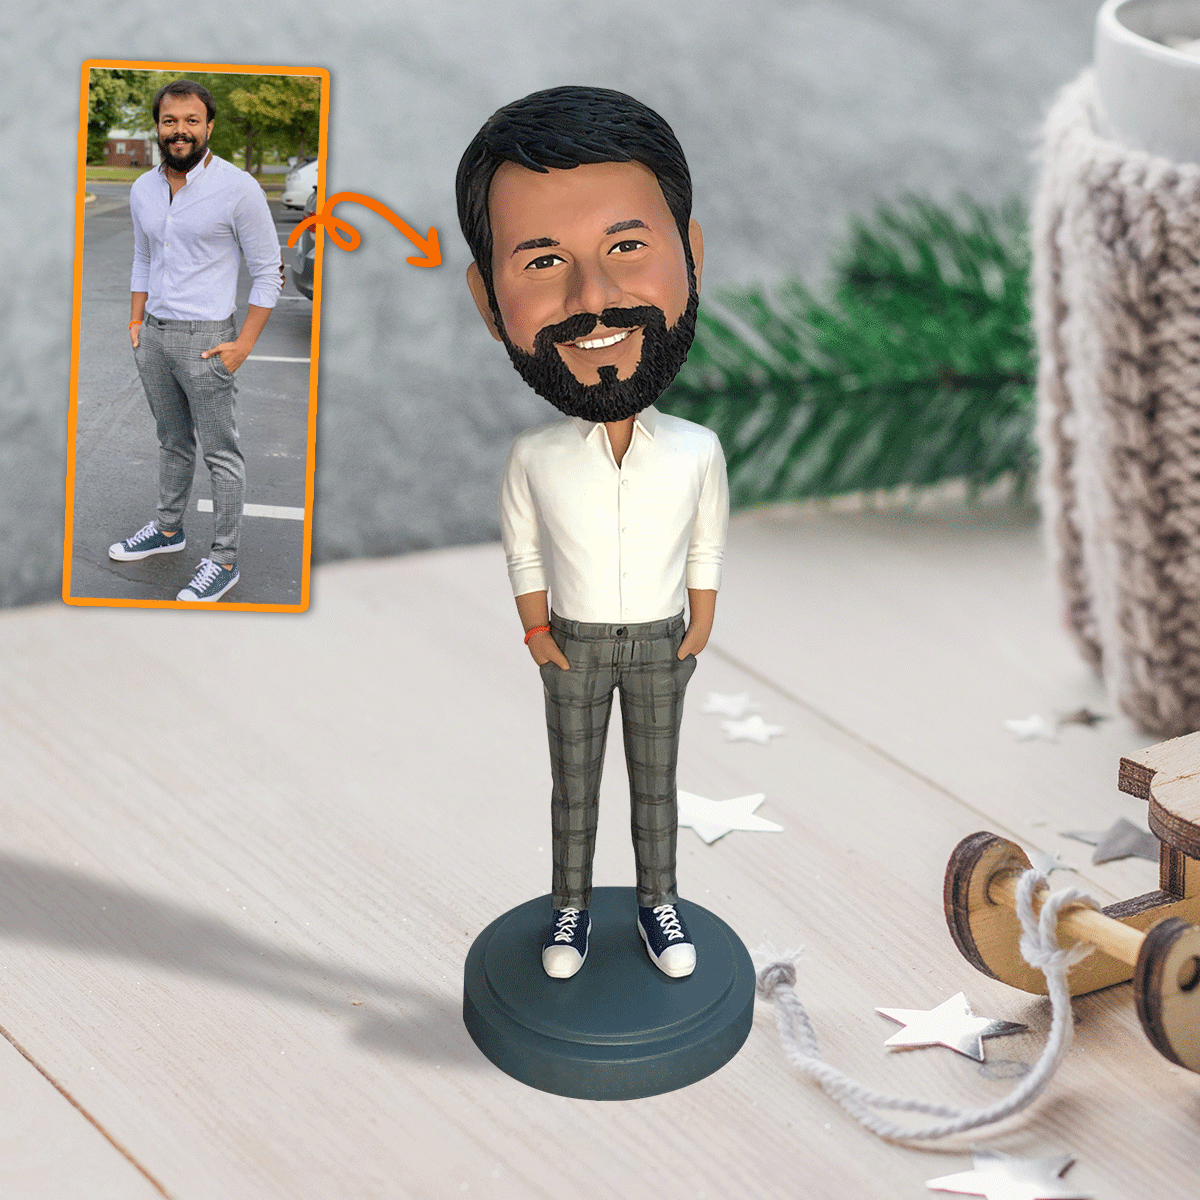 Best Uncle/Dad/Grandpa Ever - gift for uncle - Personalized Bobblehead